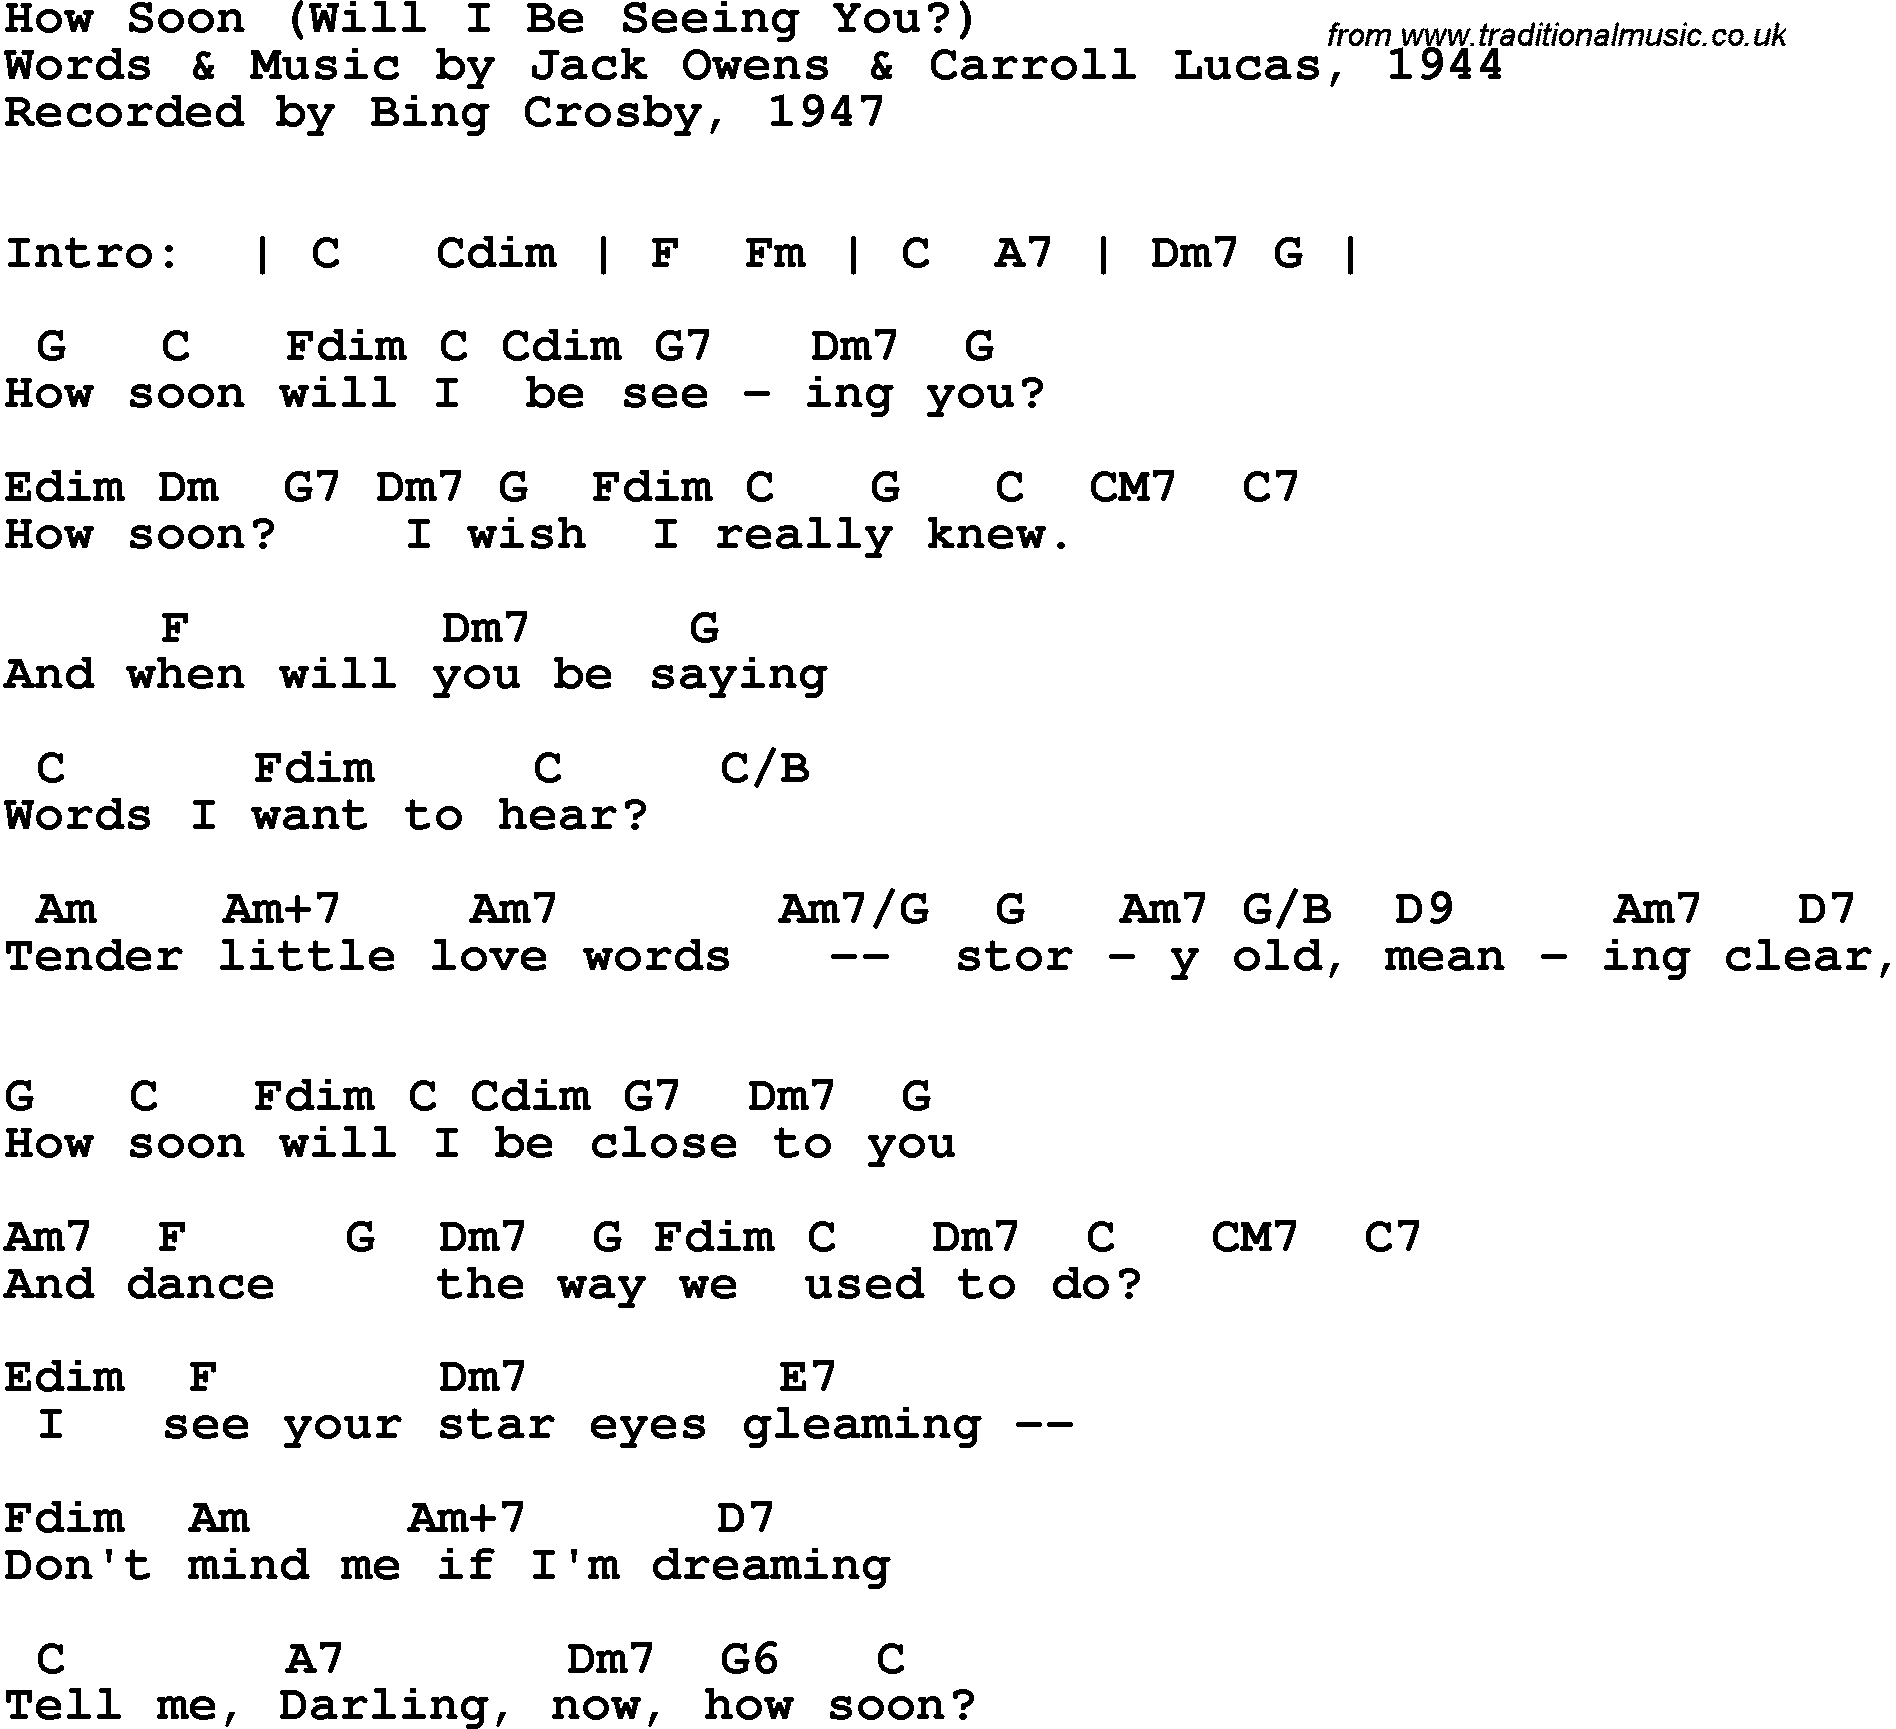 Song Lyrics with guitar chords for How Soon (Will I Be Seeing You) - Bing Crosby, 1947